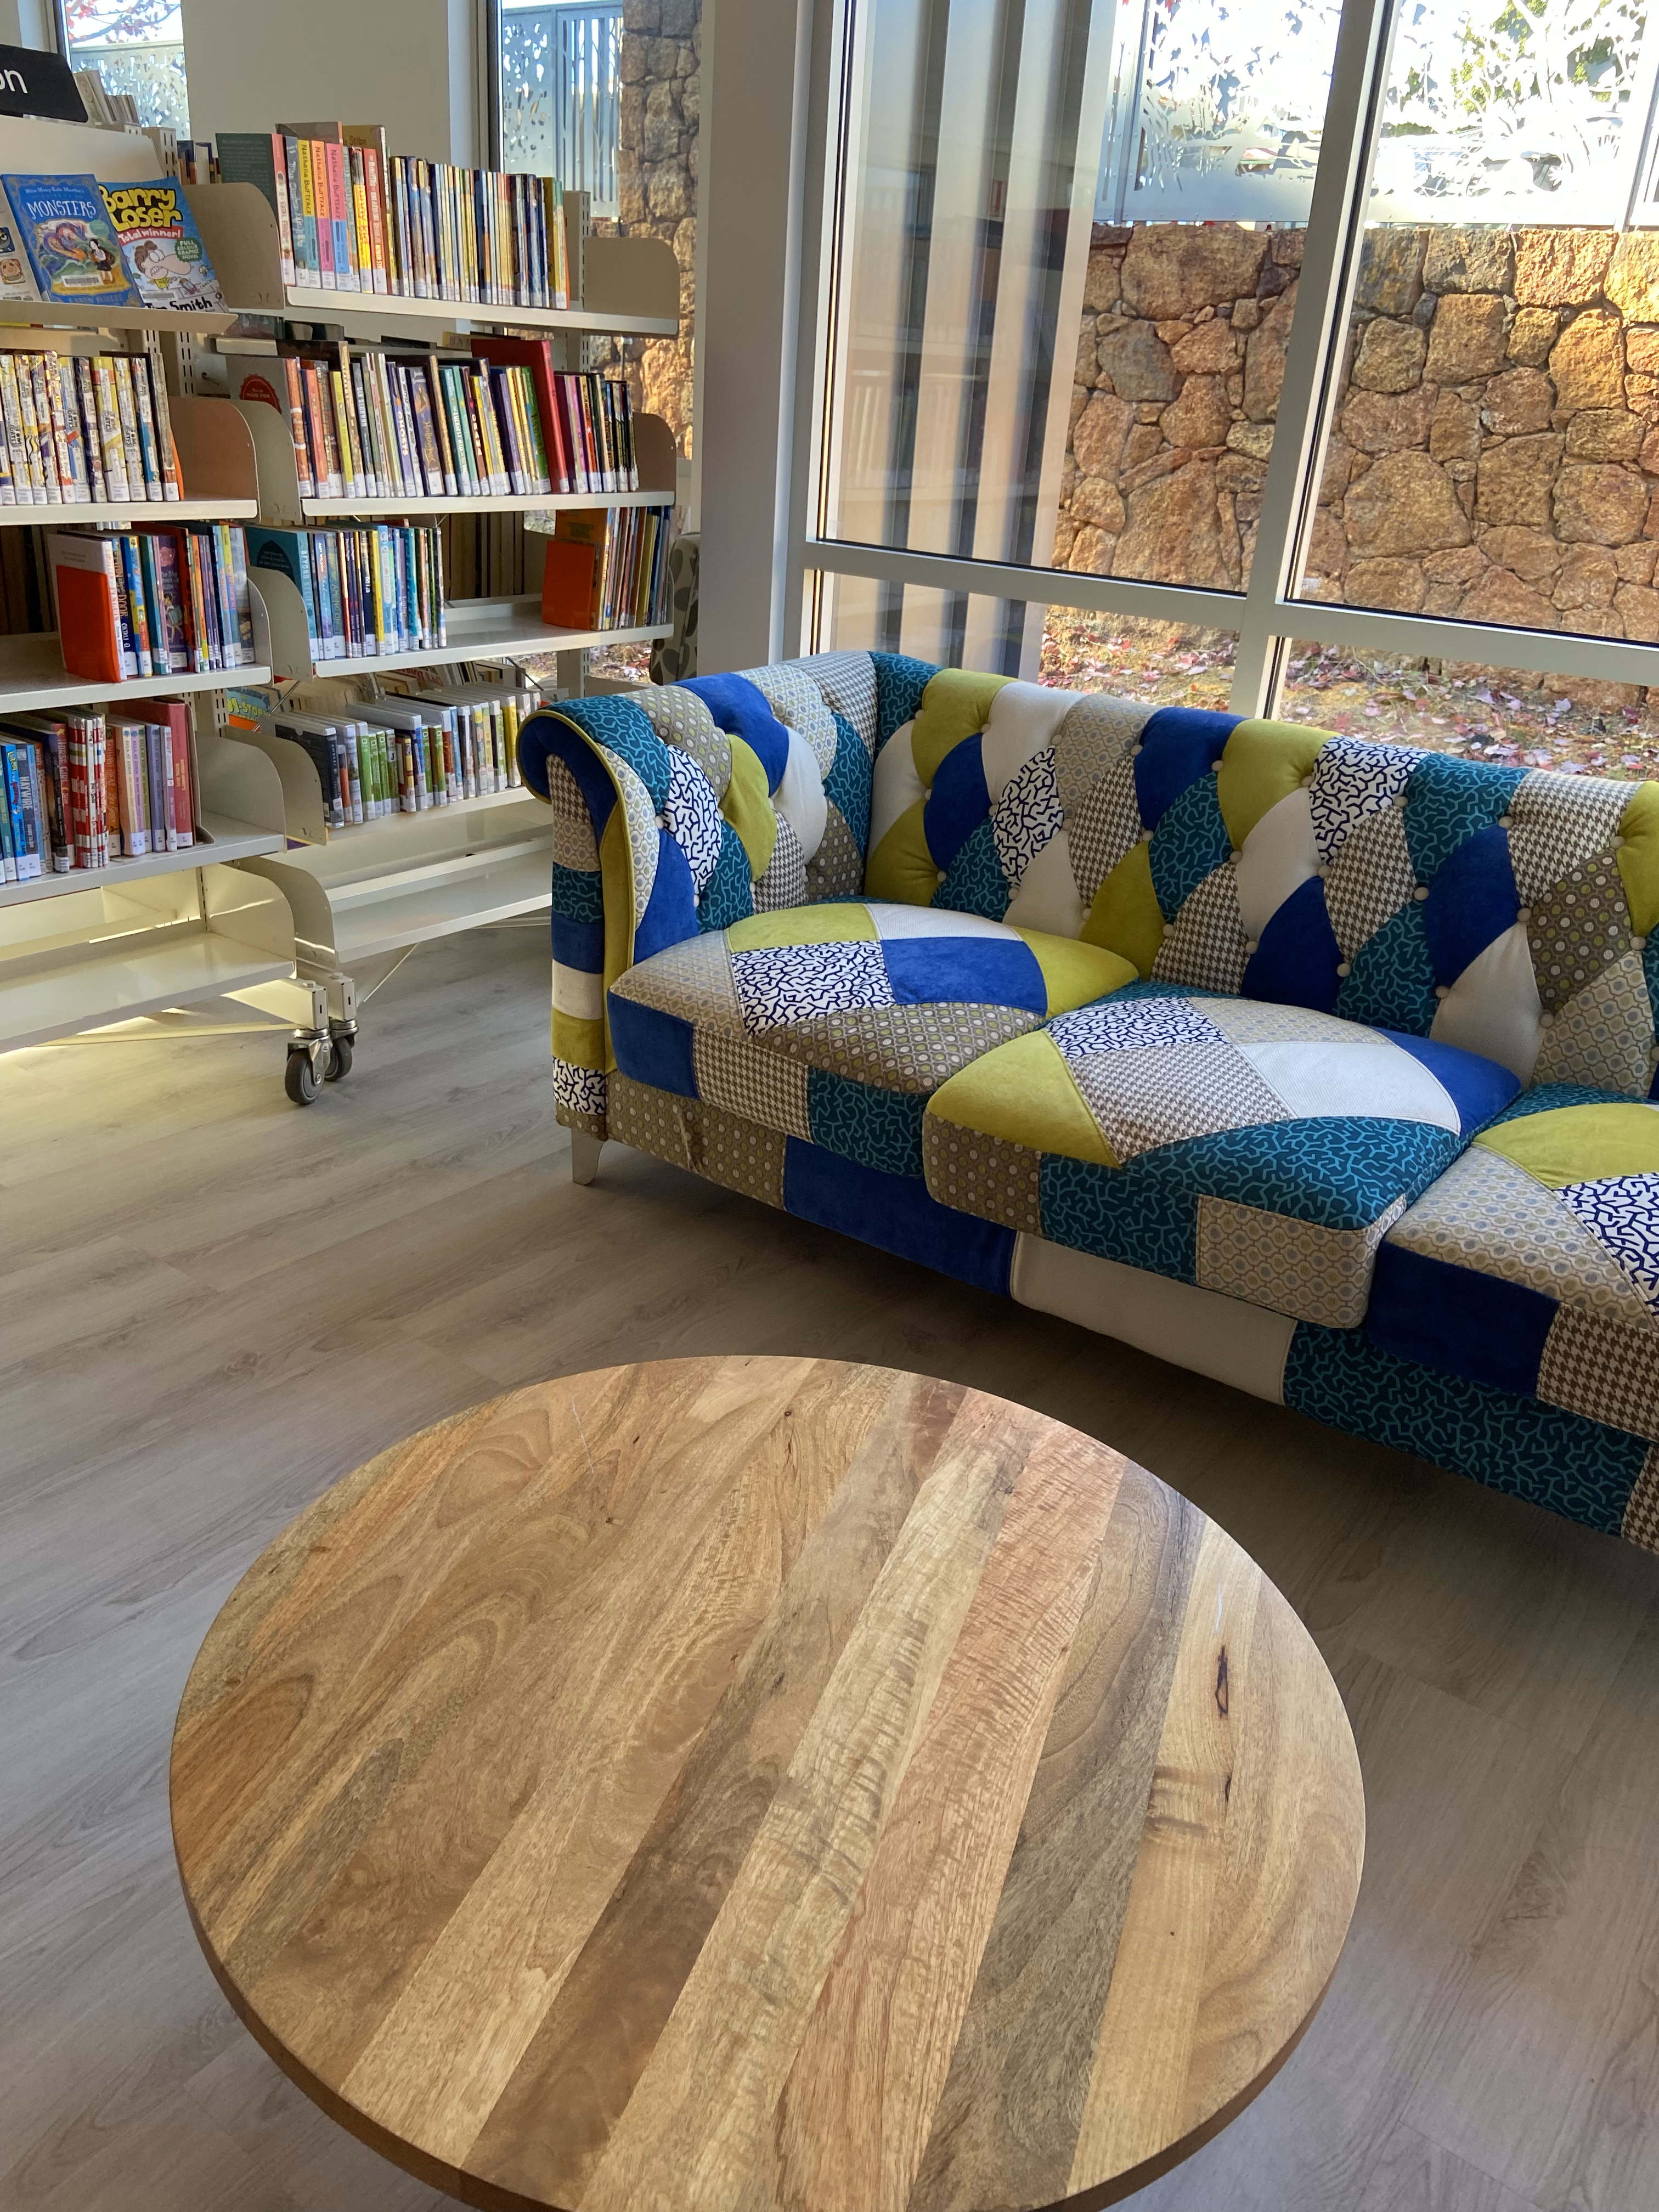 Interior photo of part of new Pemberton Library with bookshelf, couch and coffee table.